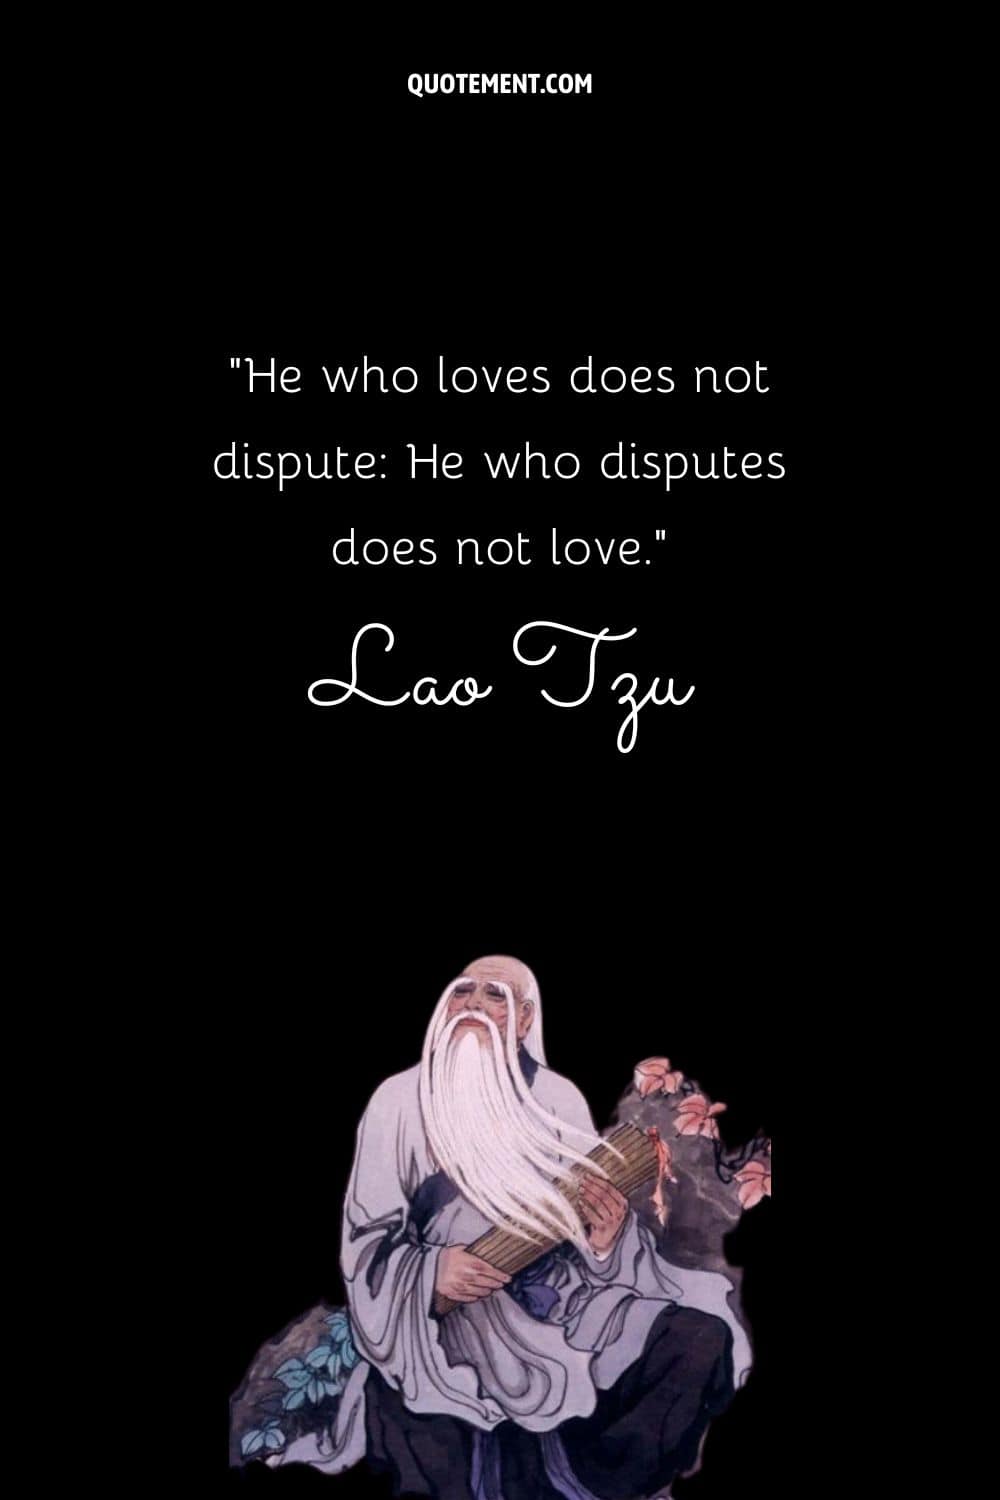 He who loves does not dispute He who disputes does not love